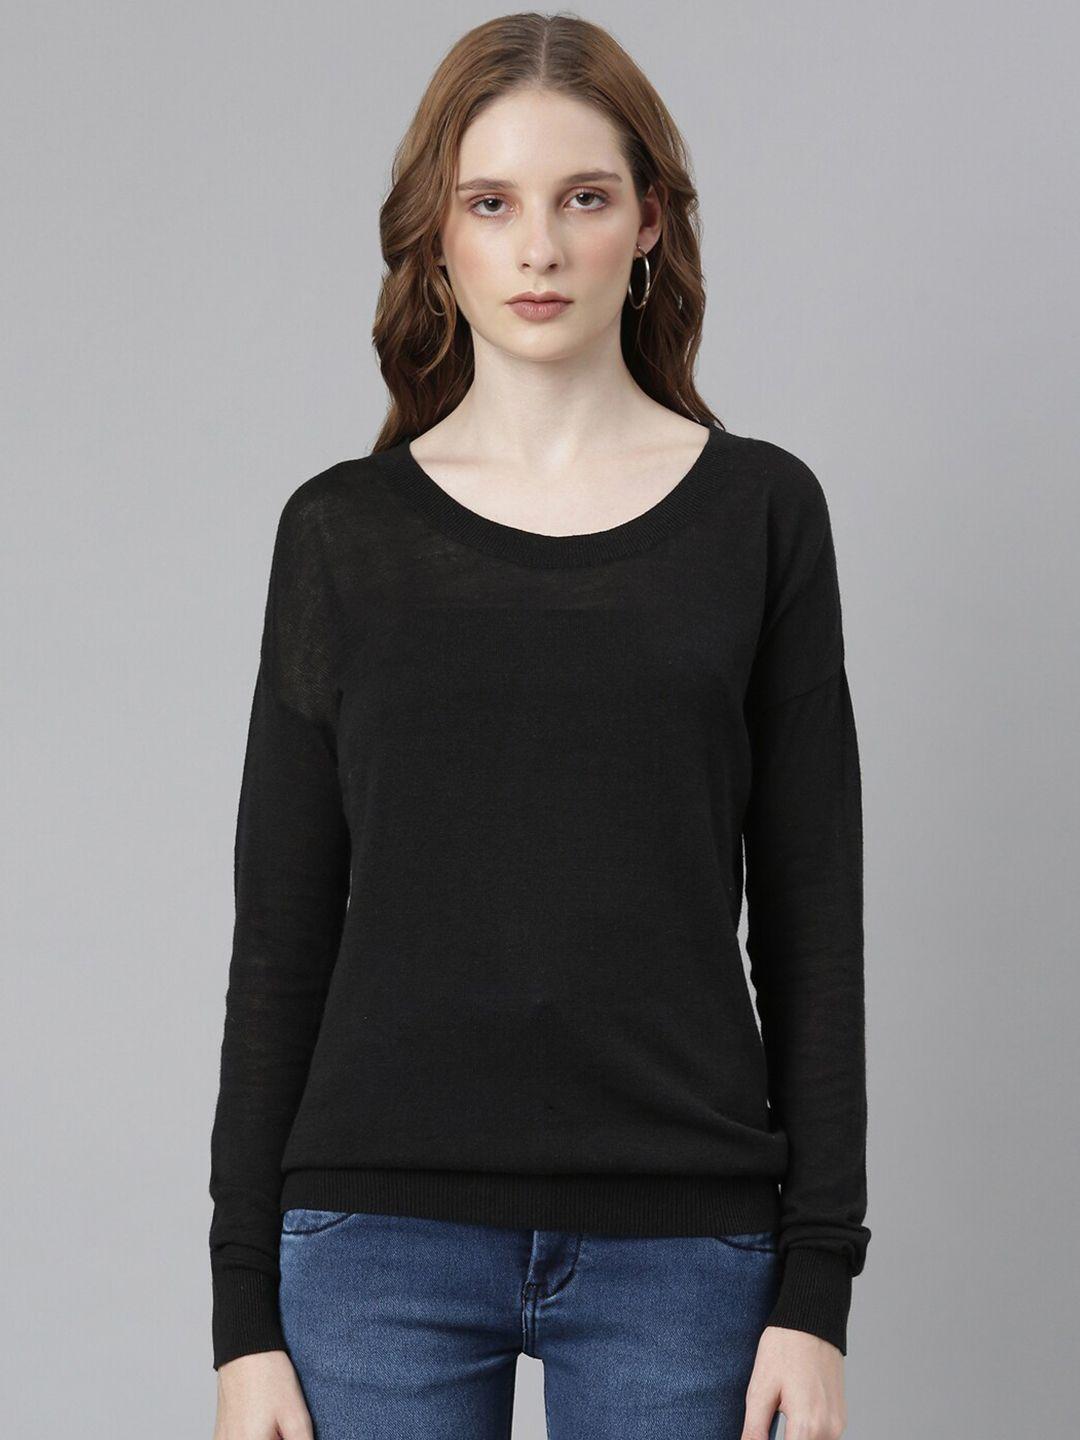 showoff round neck long sleeves top